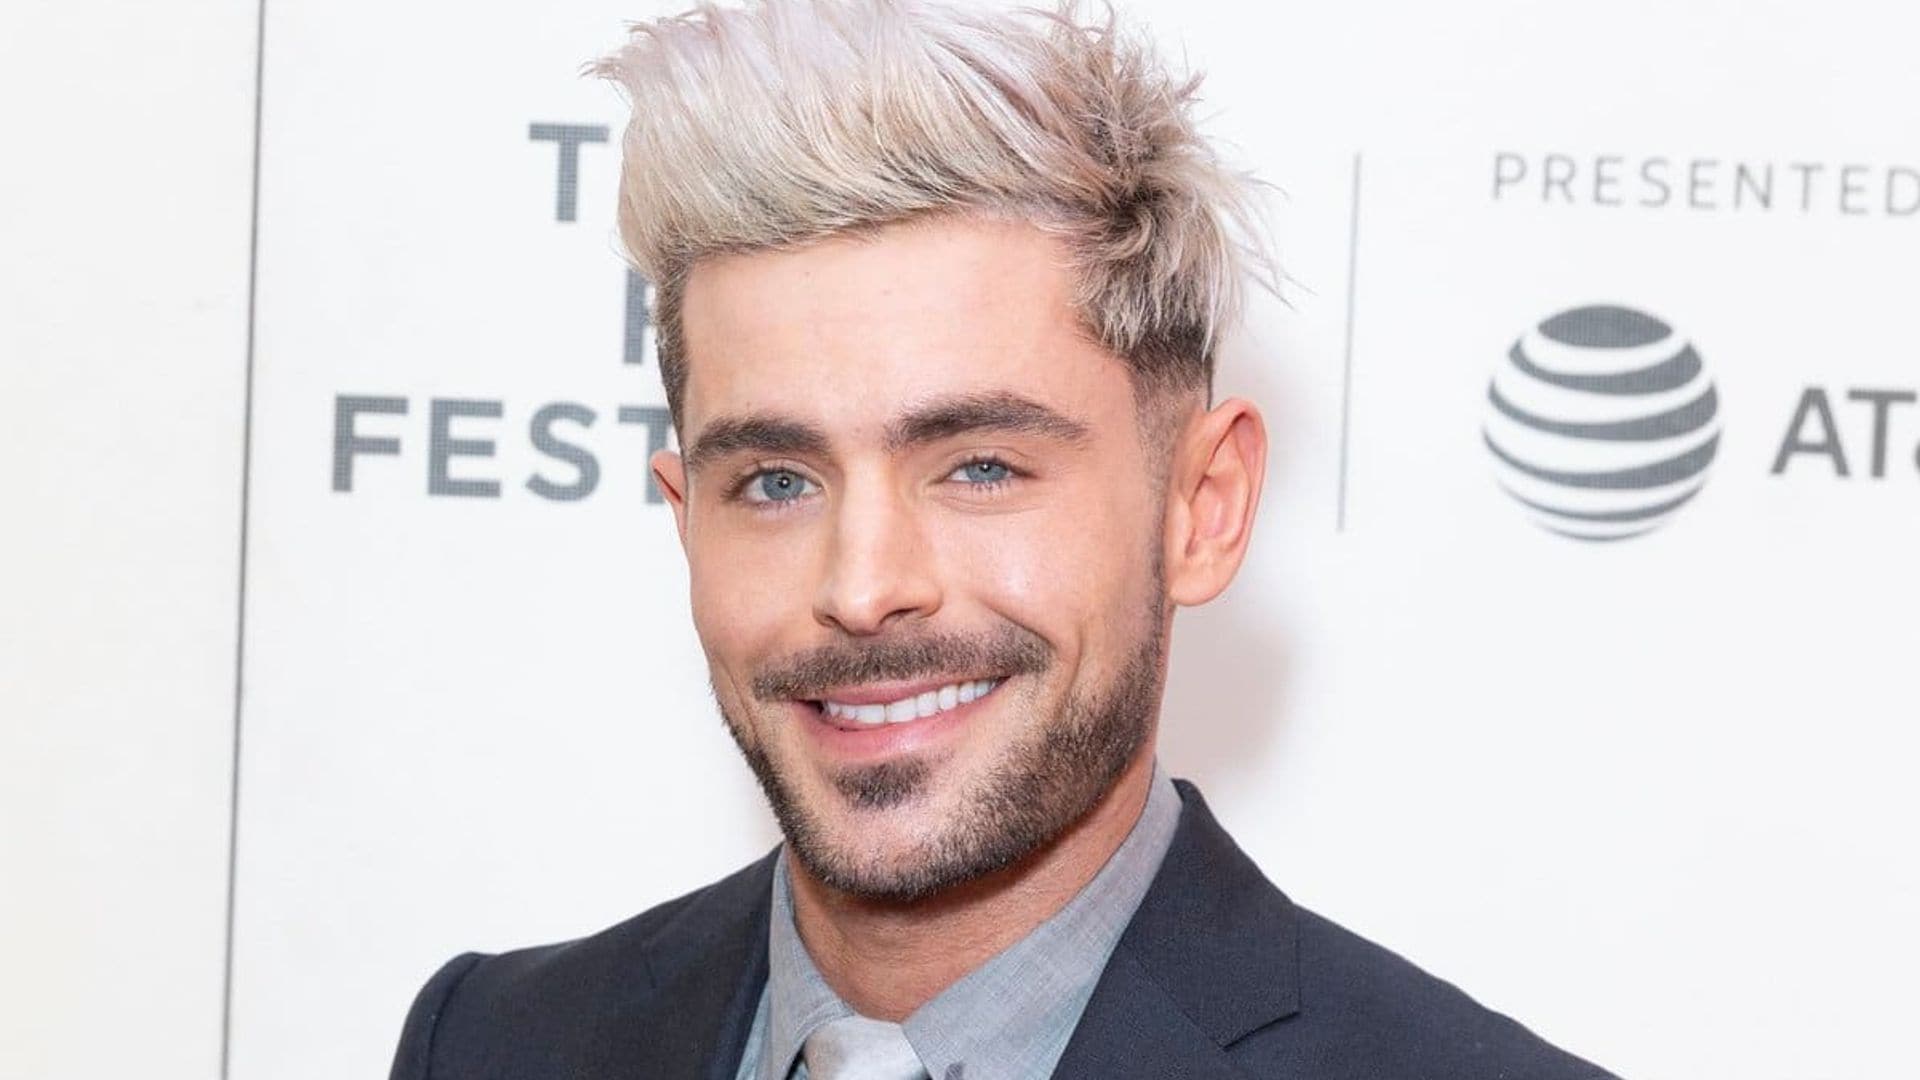 Zac Efron attends premiere of Extremely Wicked, Shockingly